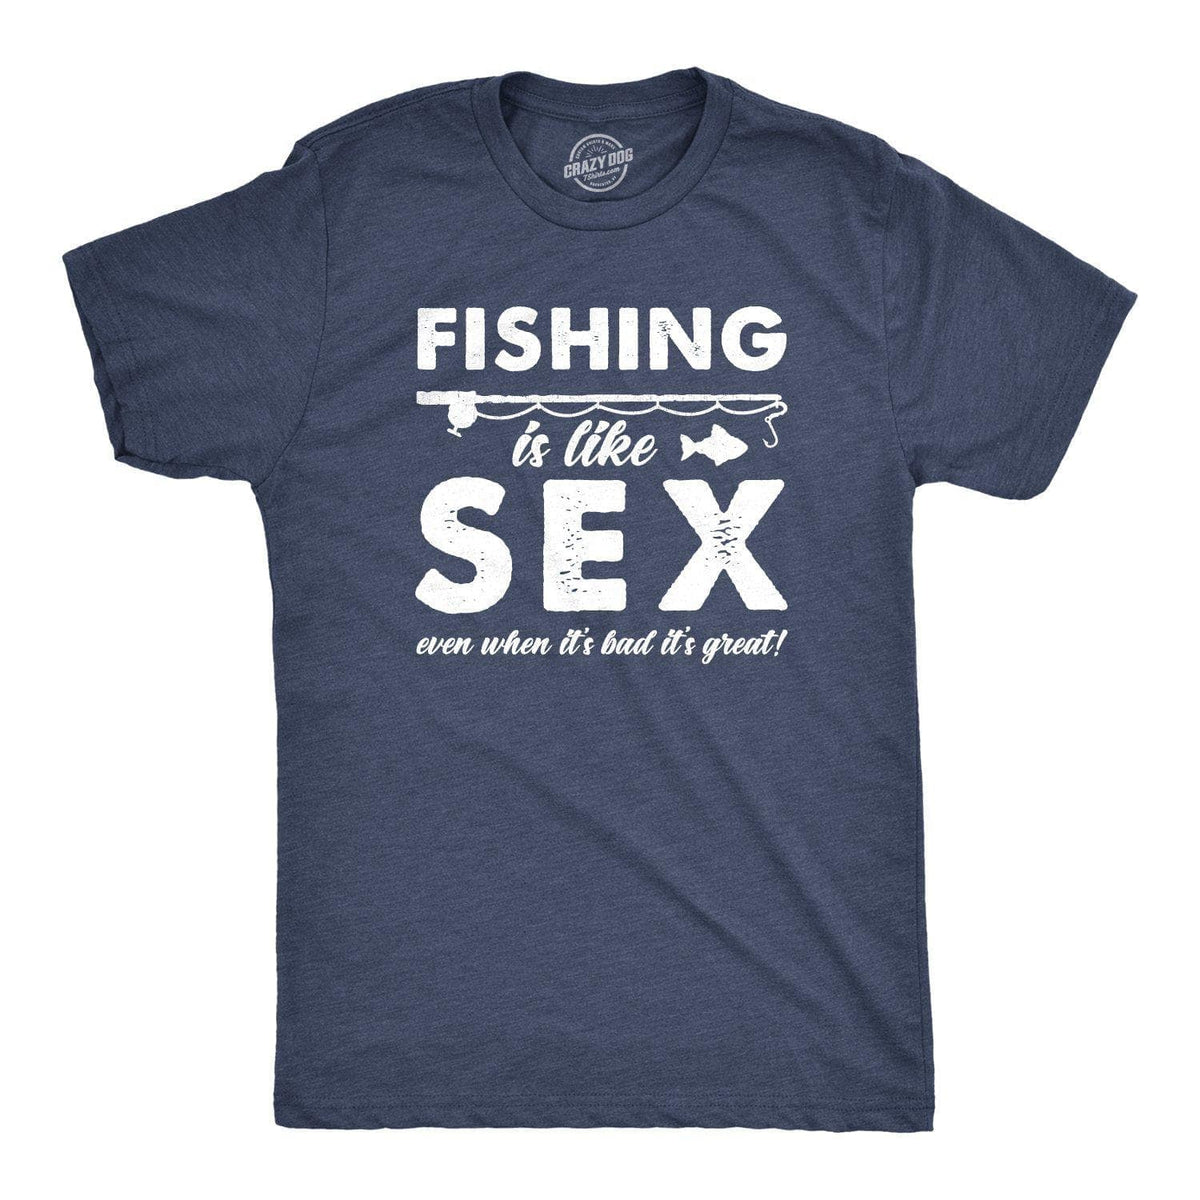 I Cant Work My Arm Is in A Cast, Mens Fishing Shirt, Funny Fishing Shirt Navy / 2XL